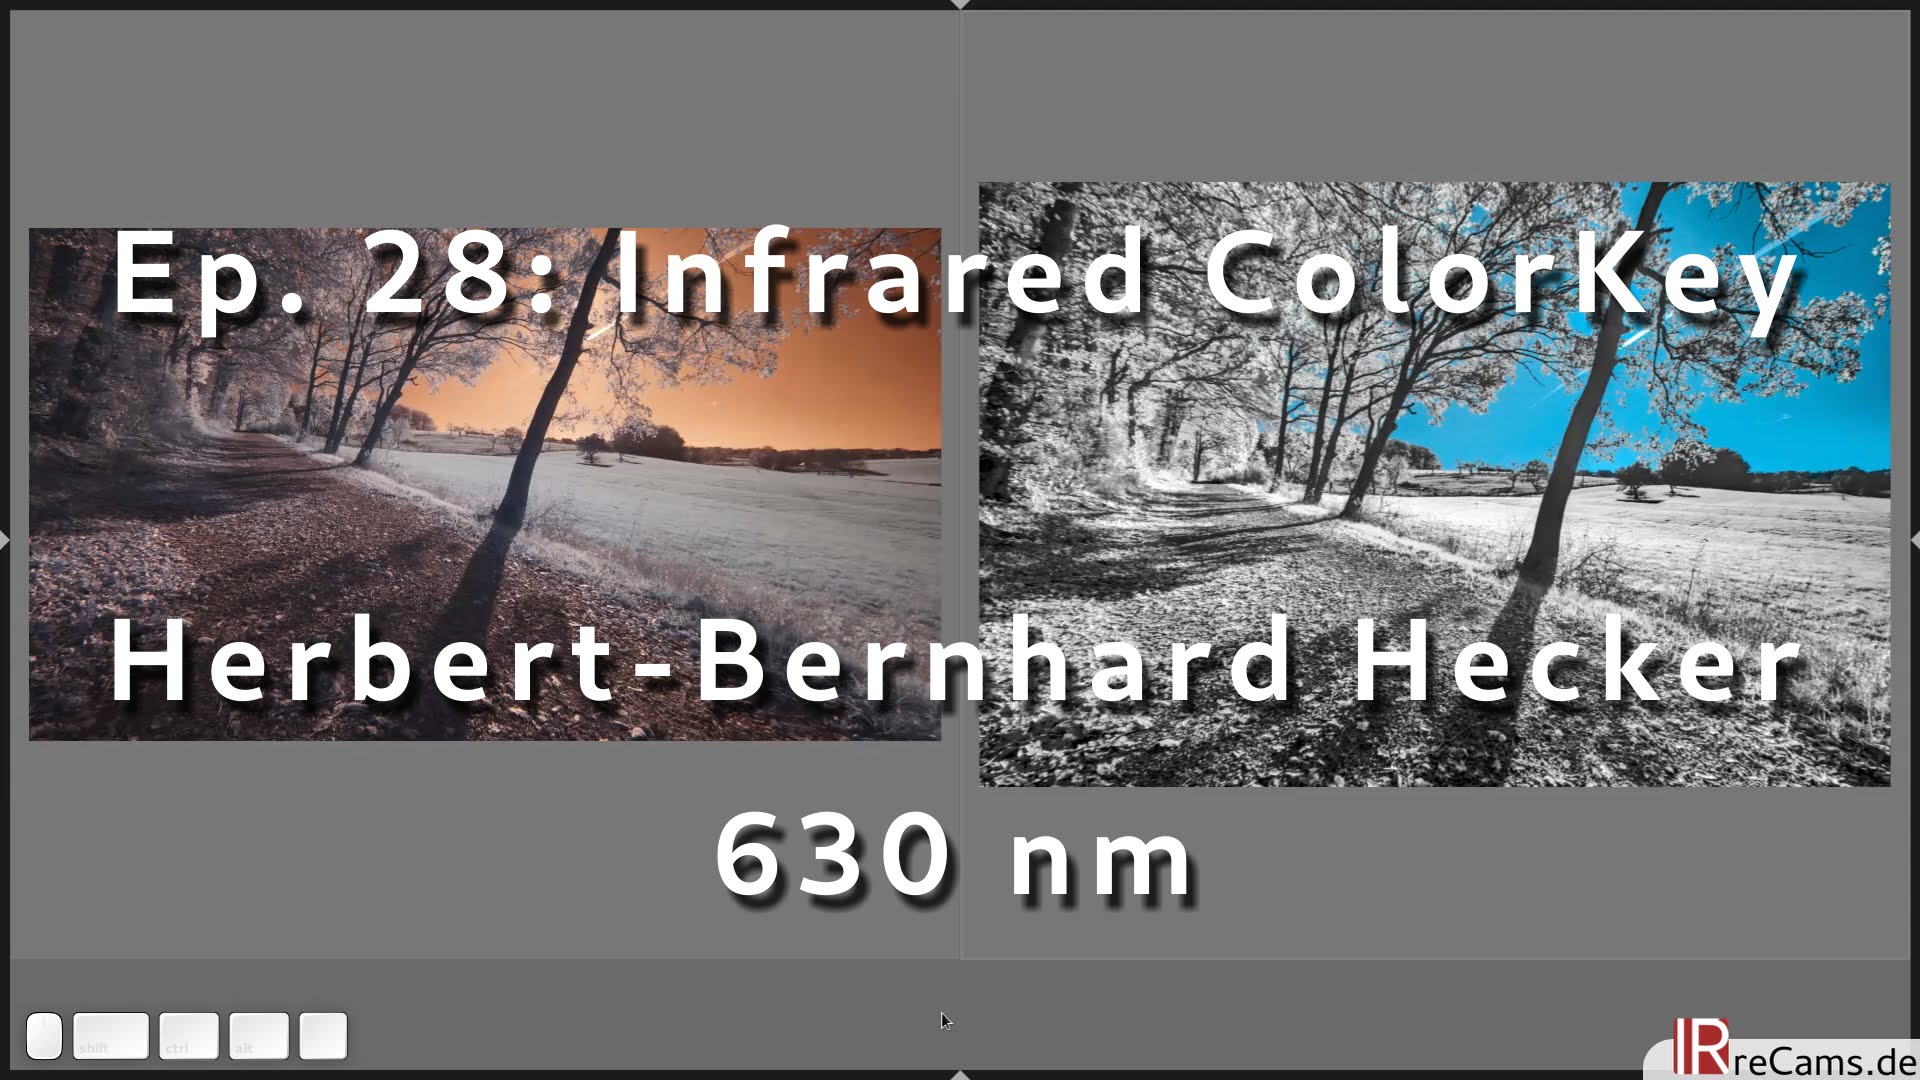 In Episode 28 we finally don't have an image taken with a 700 nm filter. I show with this 630 nm image how to do a ColorKey processing with a lot of control and many possibilities.